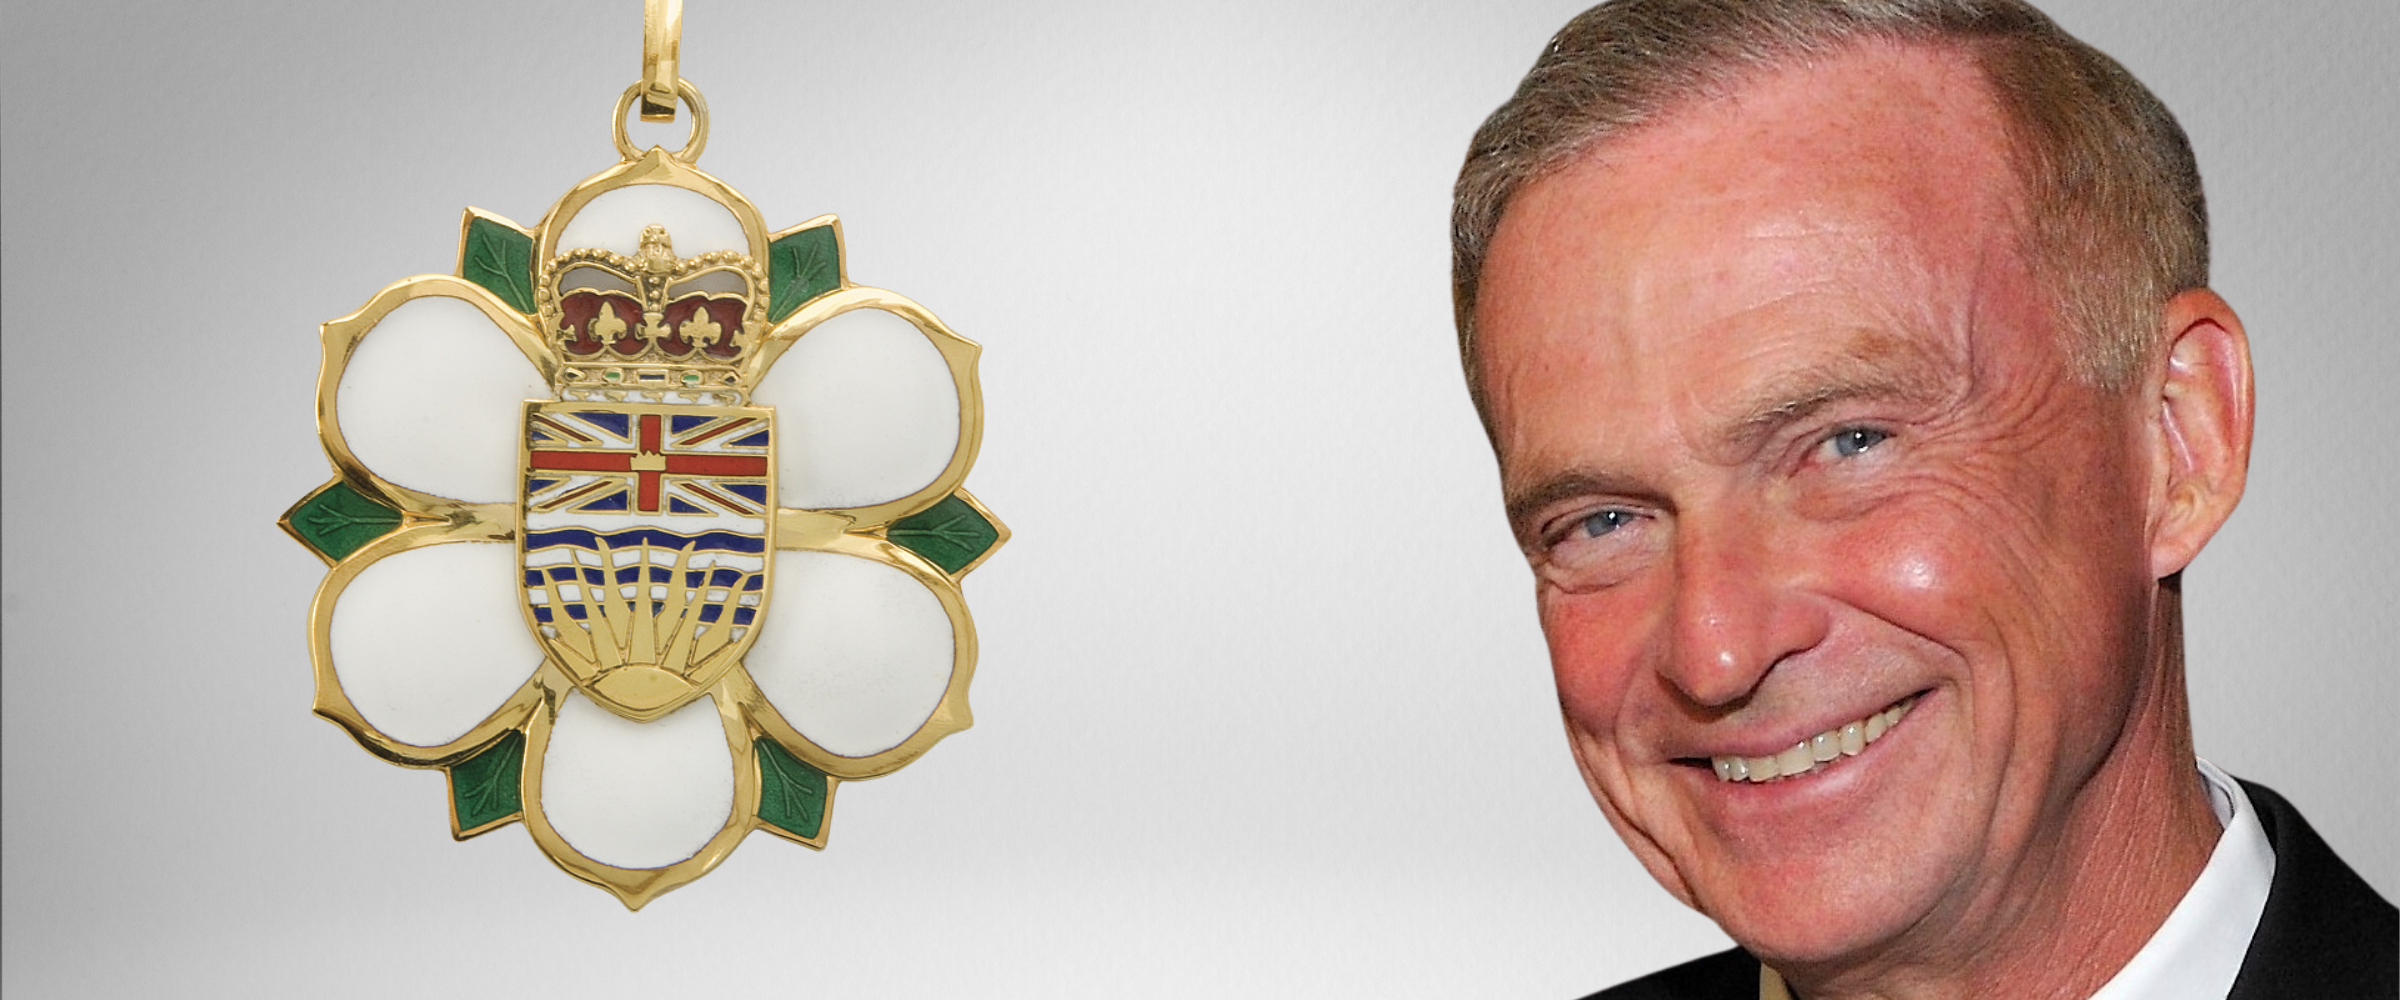 Dr. James McEwen Appointed to the Order of British Columbia